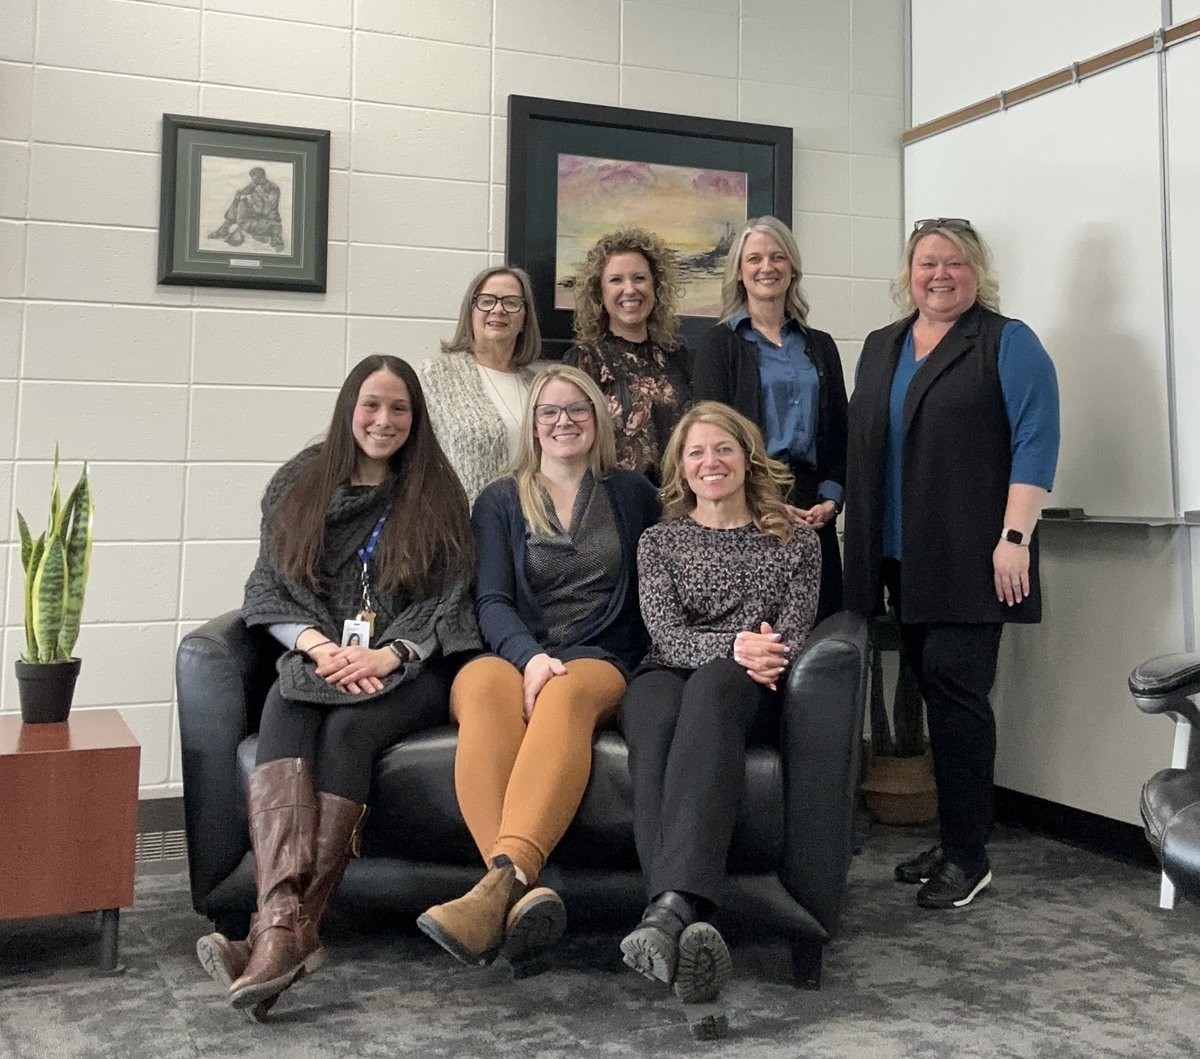 Here are just SOME of the fabulous colleagues that I am grateful to work with @FMPSD 👏💗 I am so very proud of this group! #MentalHealthTherapists #MHAdvisor #BehaviourSupportLead #ExecutiveFunctionLead #SupportStaffCapacityCoordinator #MentalHealthSupervisor @MellanieFraser